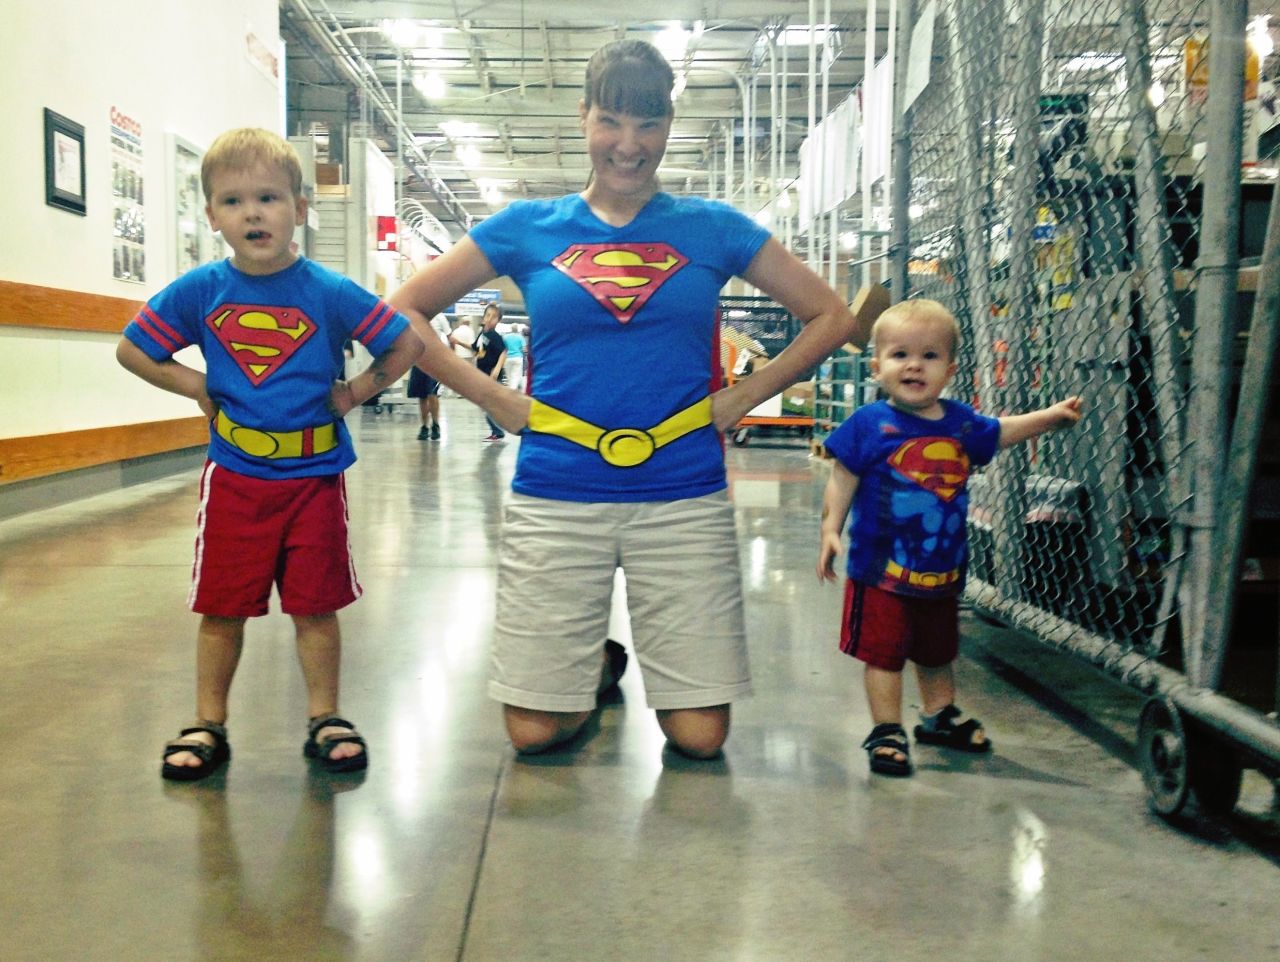 <a href="http://ireport.cnn.com/docs/DOC-978958">Steve Crawford</a> photographed his wife, Lisa, and his two sons dressed up as a superman family. He says his son, Brendan, has been on a Superman kick and insisted that his mom and younger brother join him in dressing up as the "Man of Steel." Often, he said, Superman is the first superhero kids are exposed to. "Kids like to pretend, and that's so far away from reality, that it's fun to imagine," he said, recalling that his earliest memories of Superman are from the 1980s Christopher Reeve movies.  